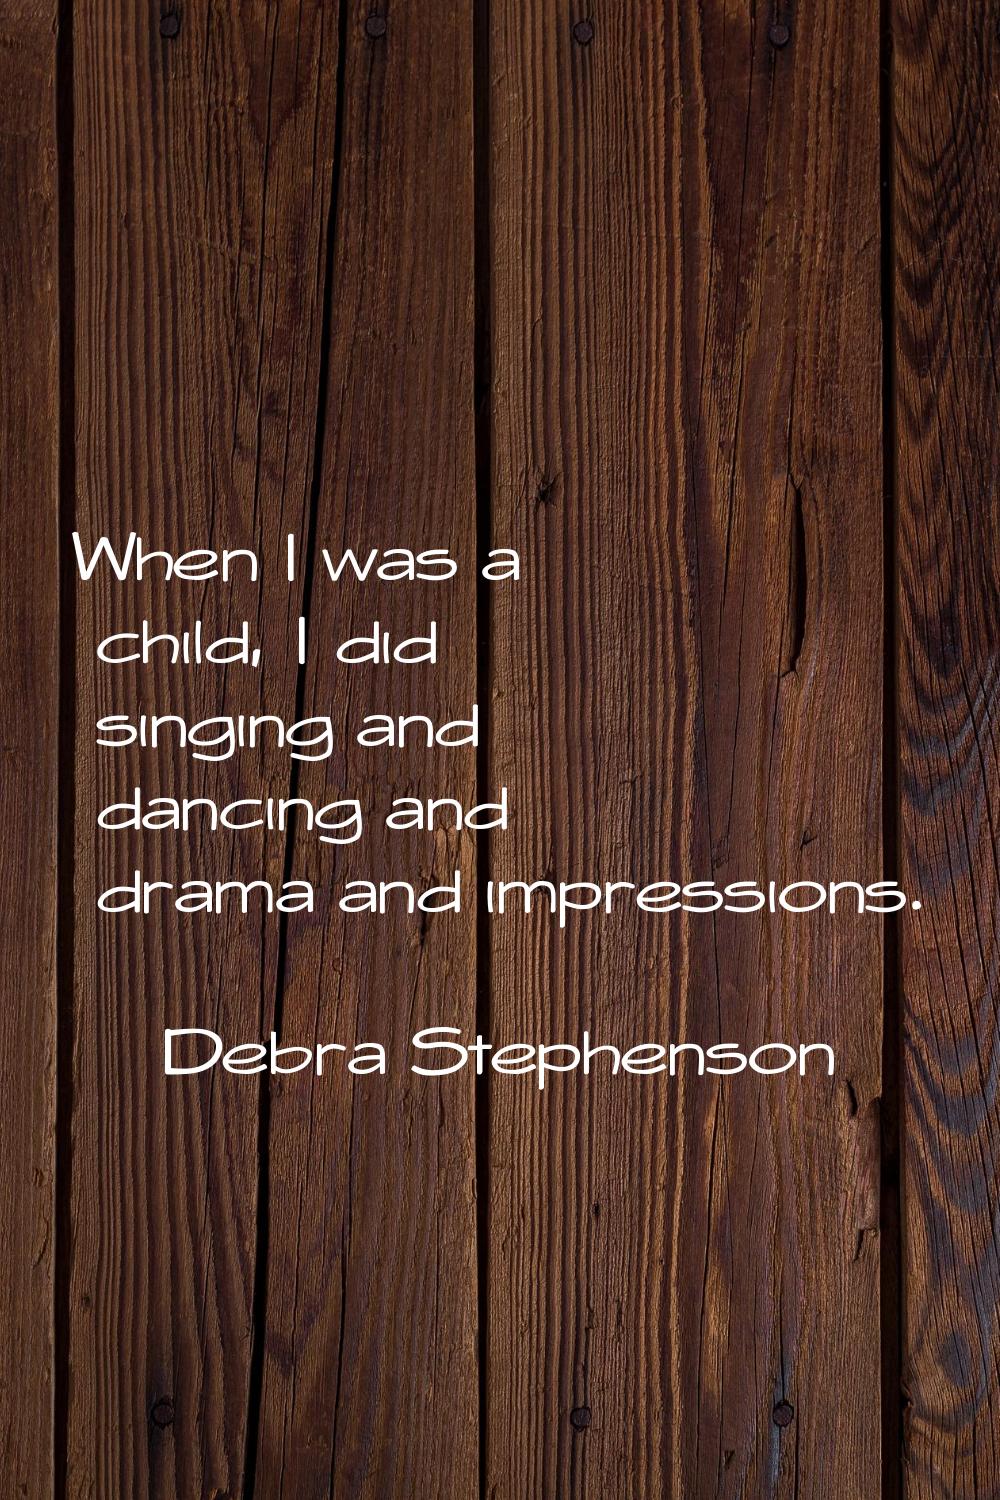 When I was a child, I did singing and dancing and drama and impressions.